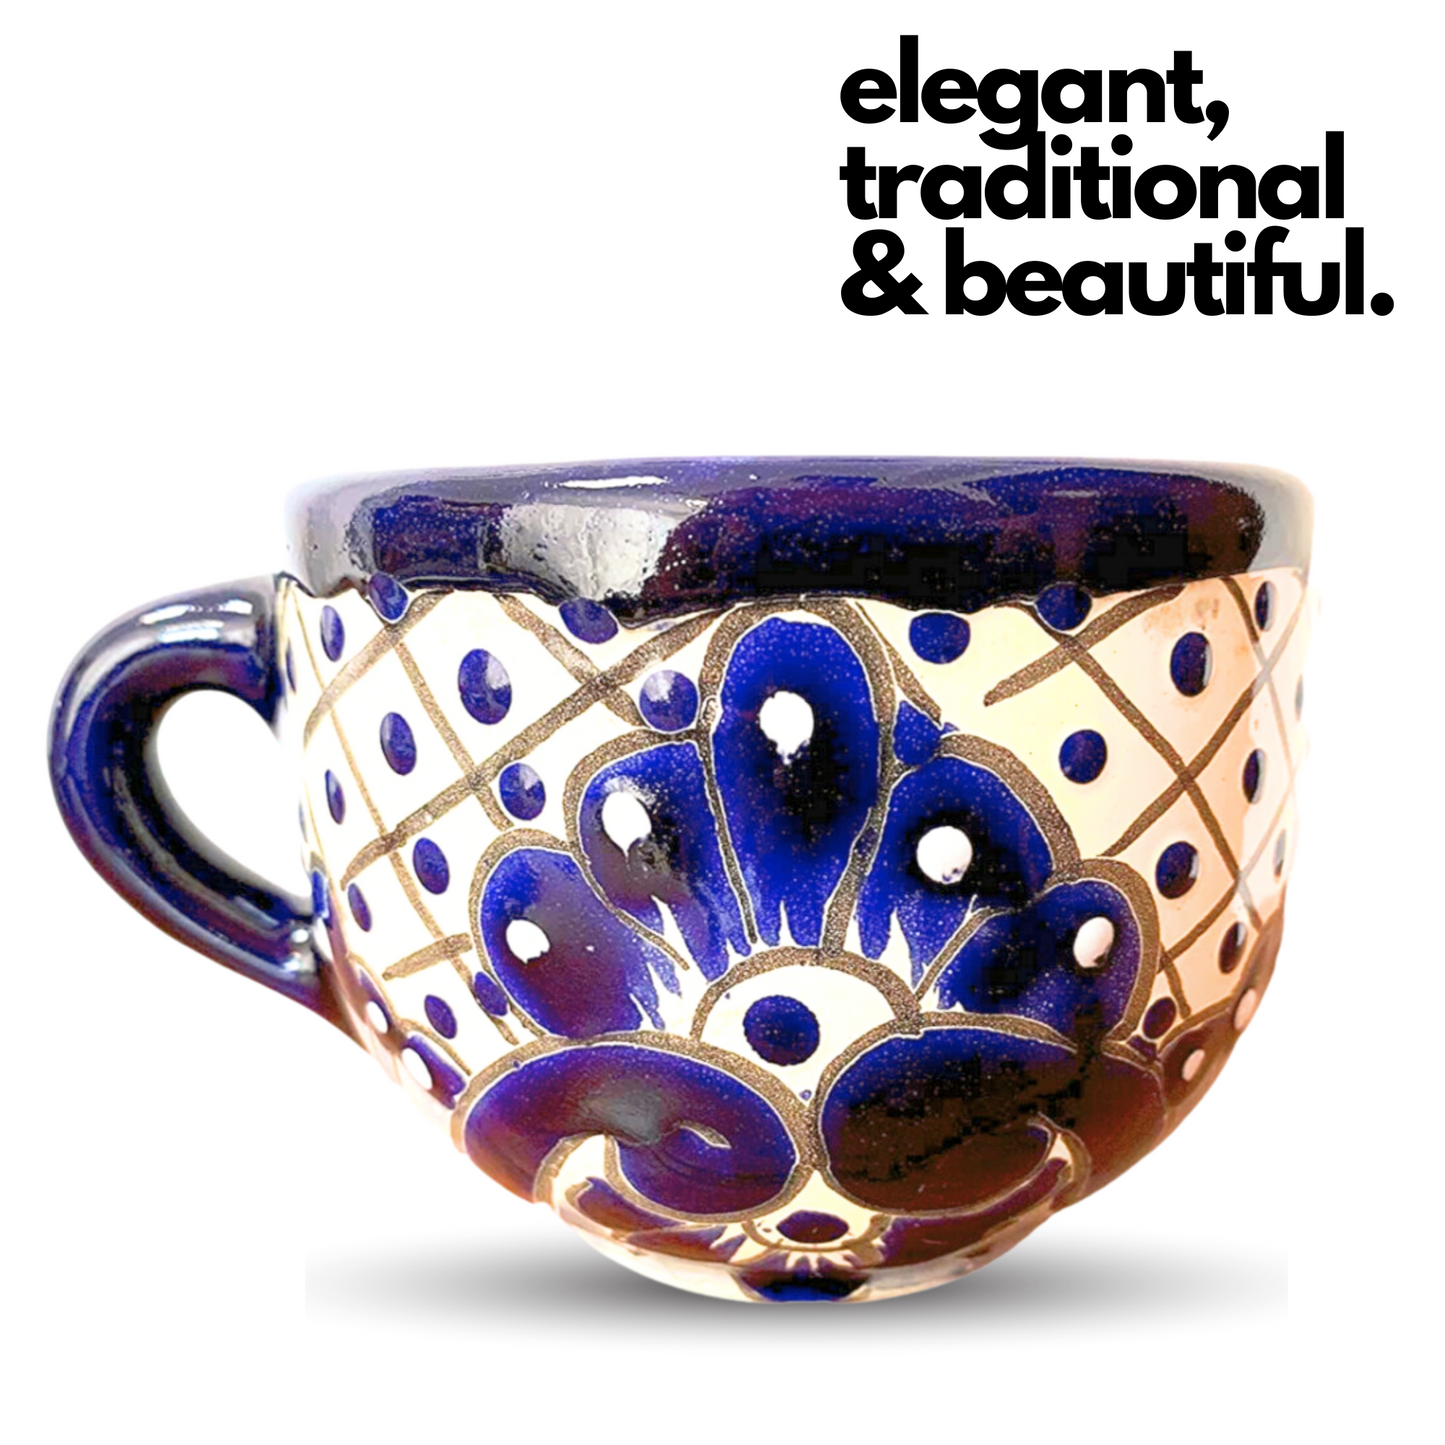 elegant traditional and beautiful Hand Painted Wide Mouth Mug in Blue and White - Authentic Mexican Pottery by Casa Fiesta Designs.